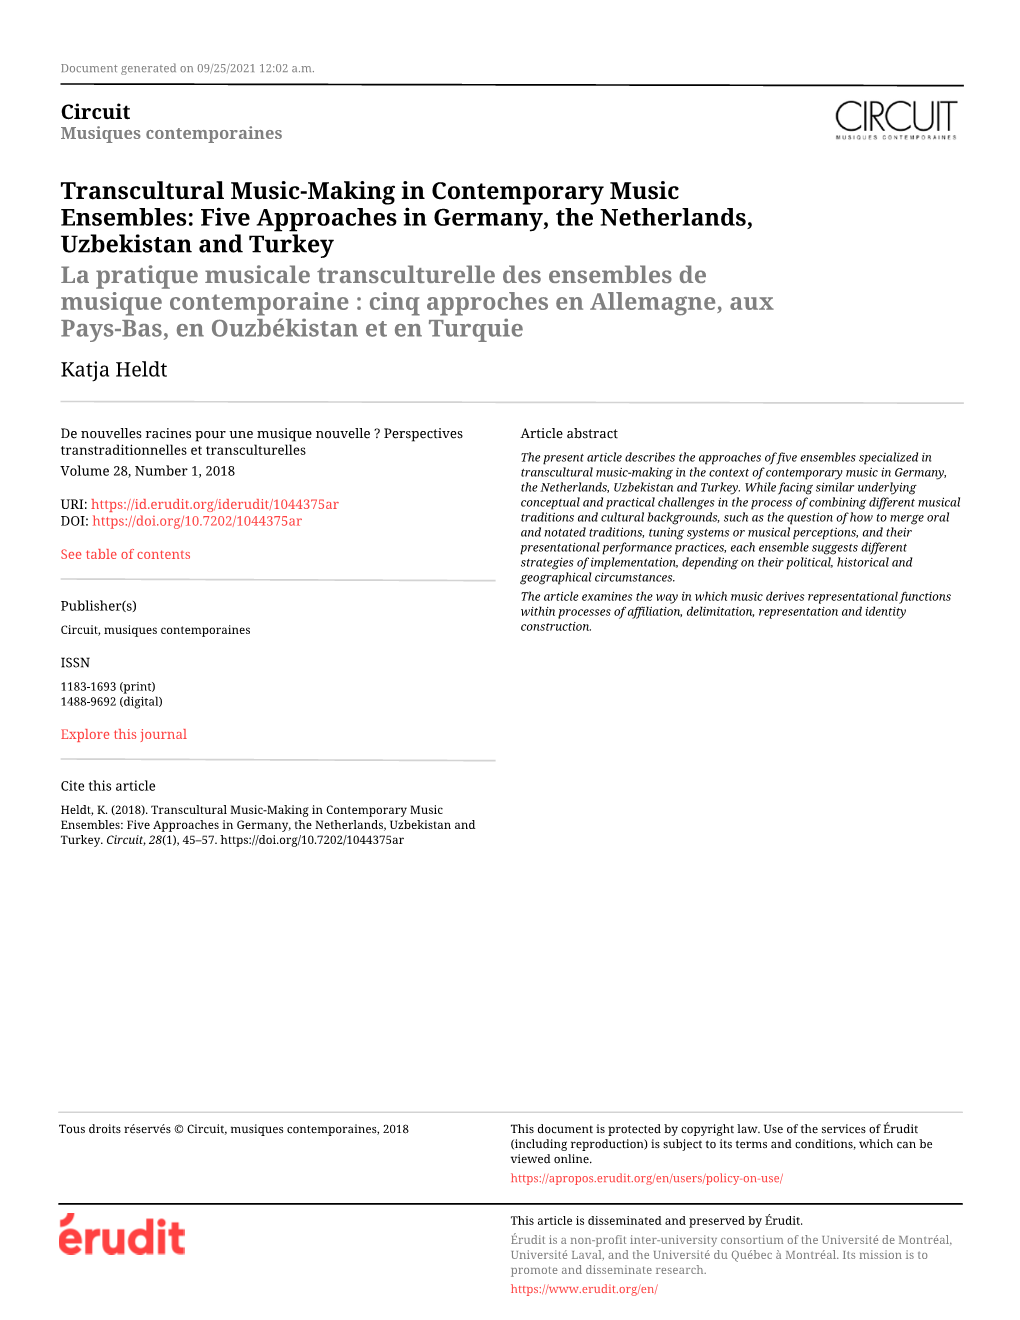 Transcultural Music-Making in Contemporary Music Ensembles: Five Approaches in Germany, the Netherlands, Uzbekistan and Turkey